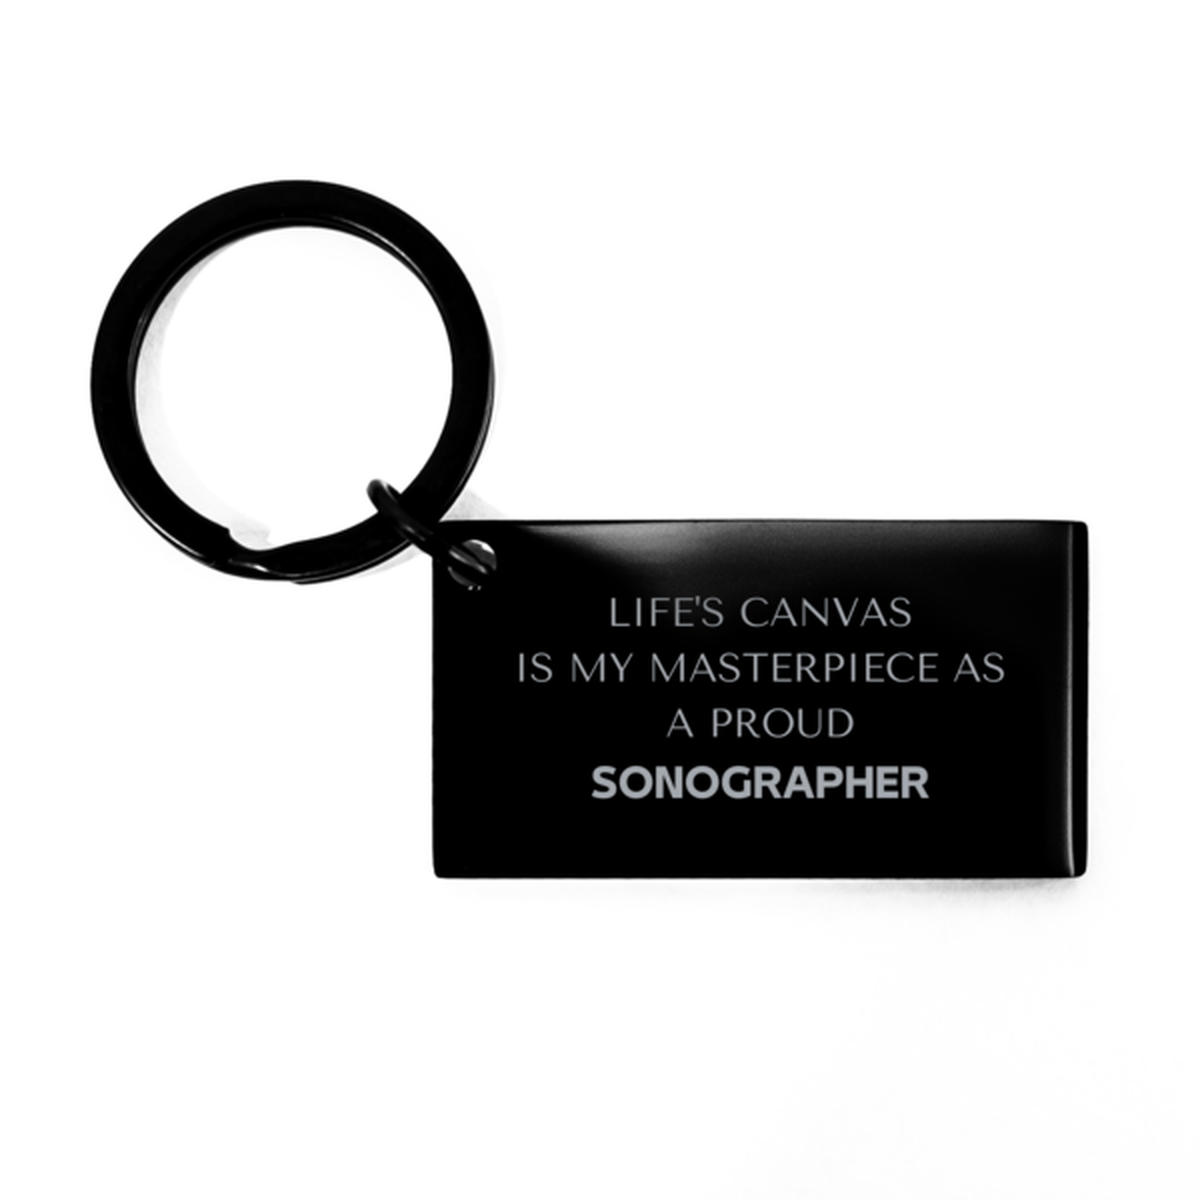 Proud Sonographer Gifts, Life's canvas is my masterpiece, Epic Birthday Christmas Unique Keychain For Sonographer, Coworkers, Men, Women, Friends